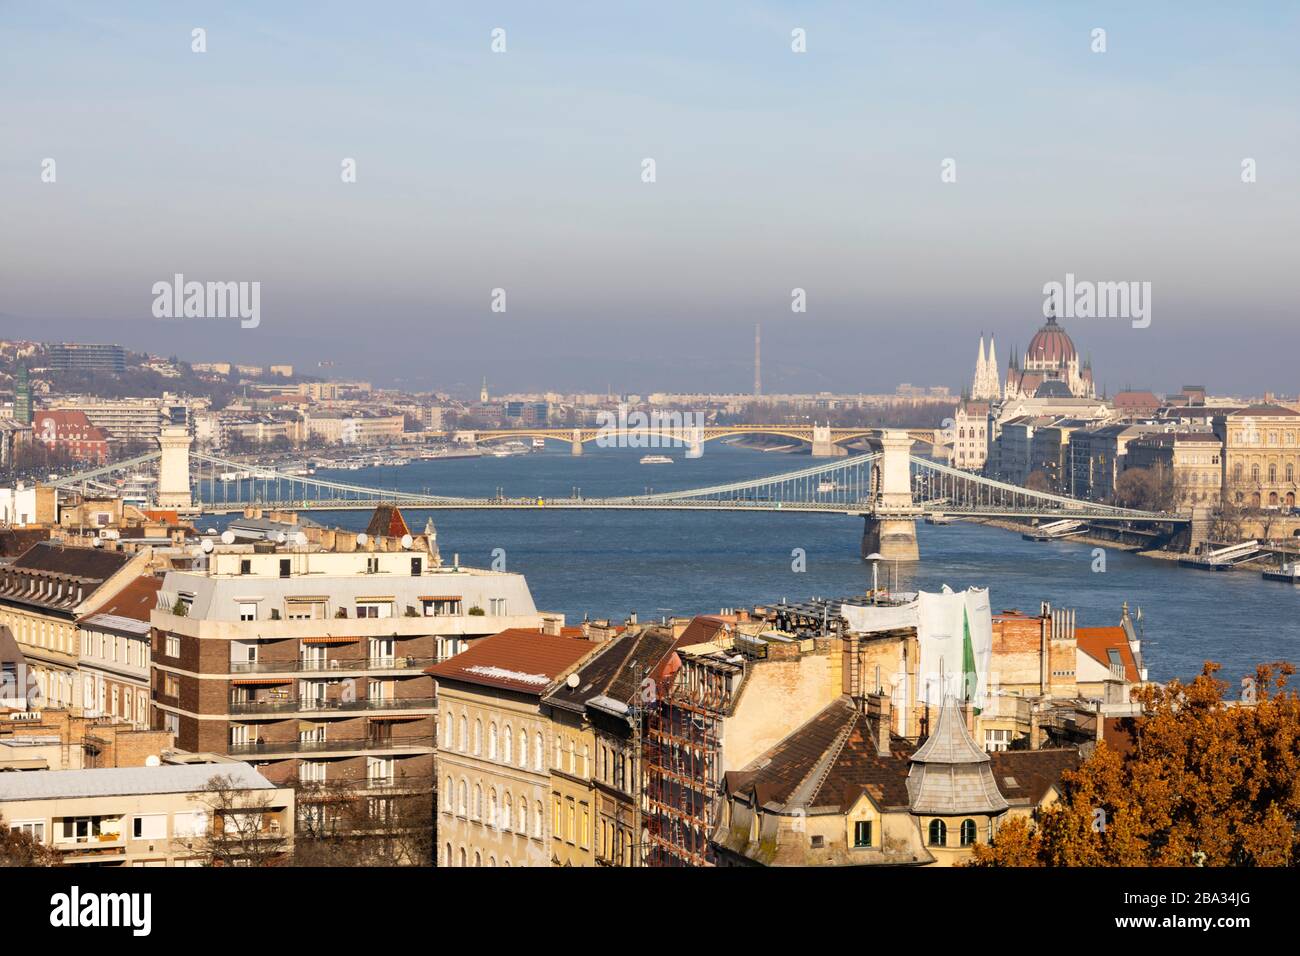 View over the River Danube, Winter in Budapest, Hungary. December 2019 Stock Photo